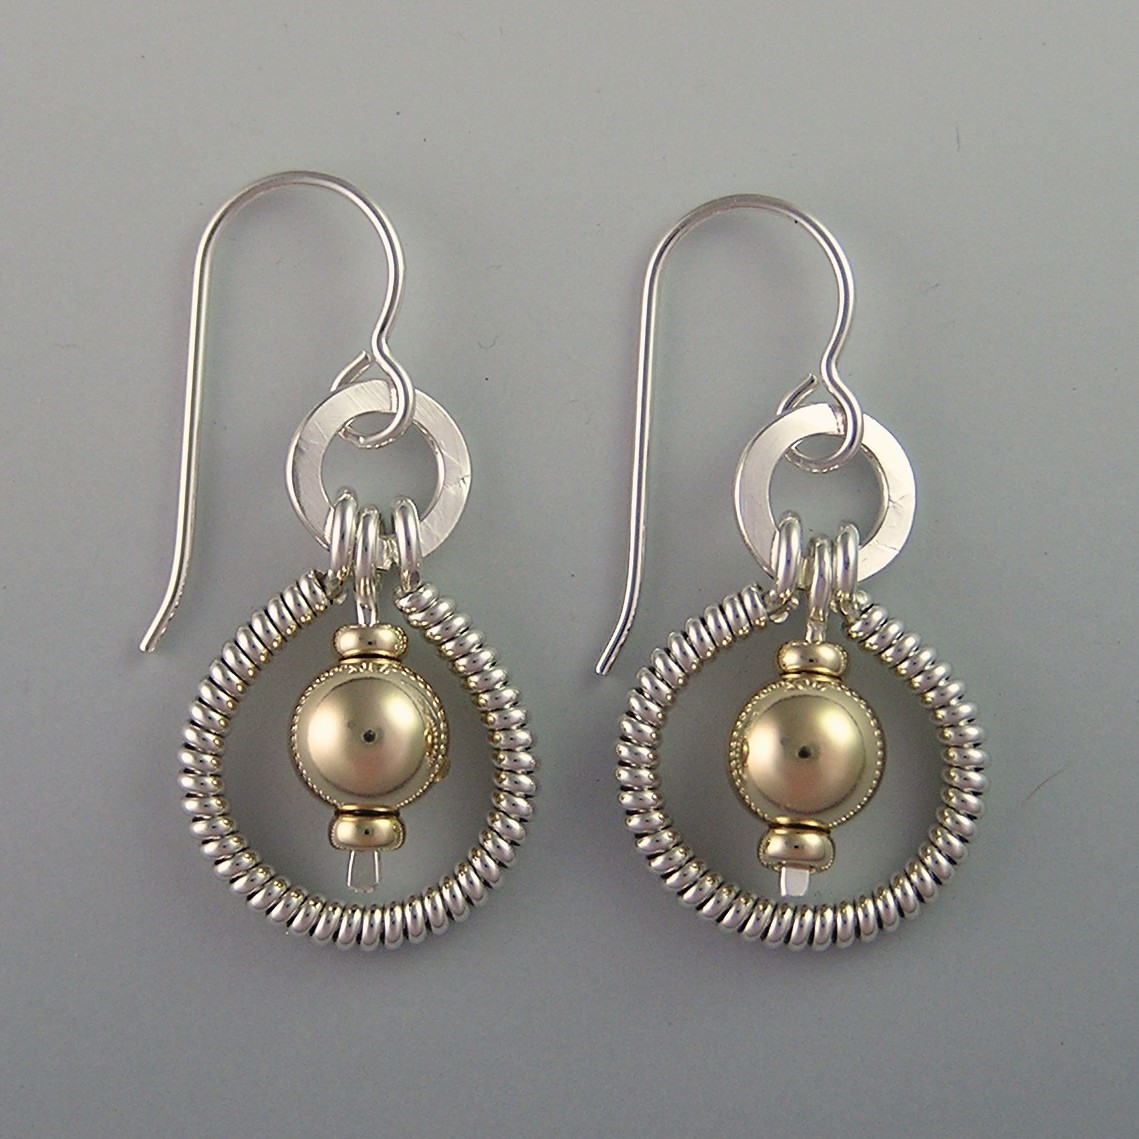 Silver & Gold Earrings - BJChristian Designs Jewelry - Beauty For Your Soul